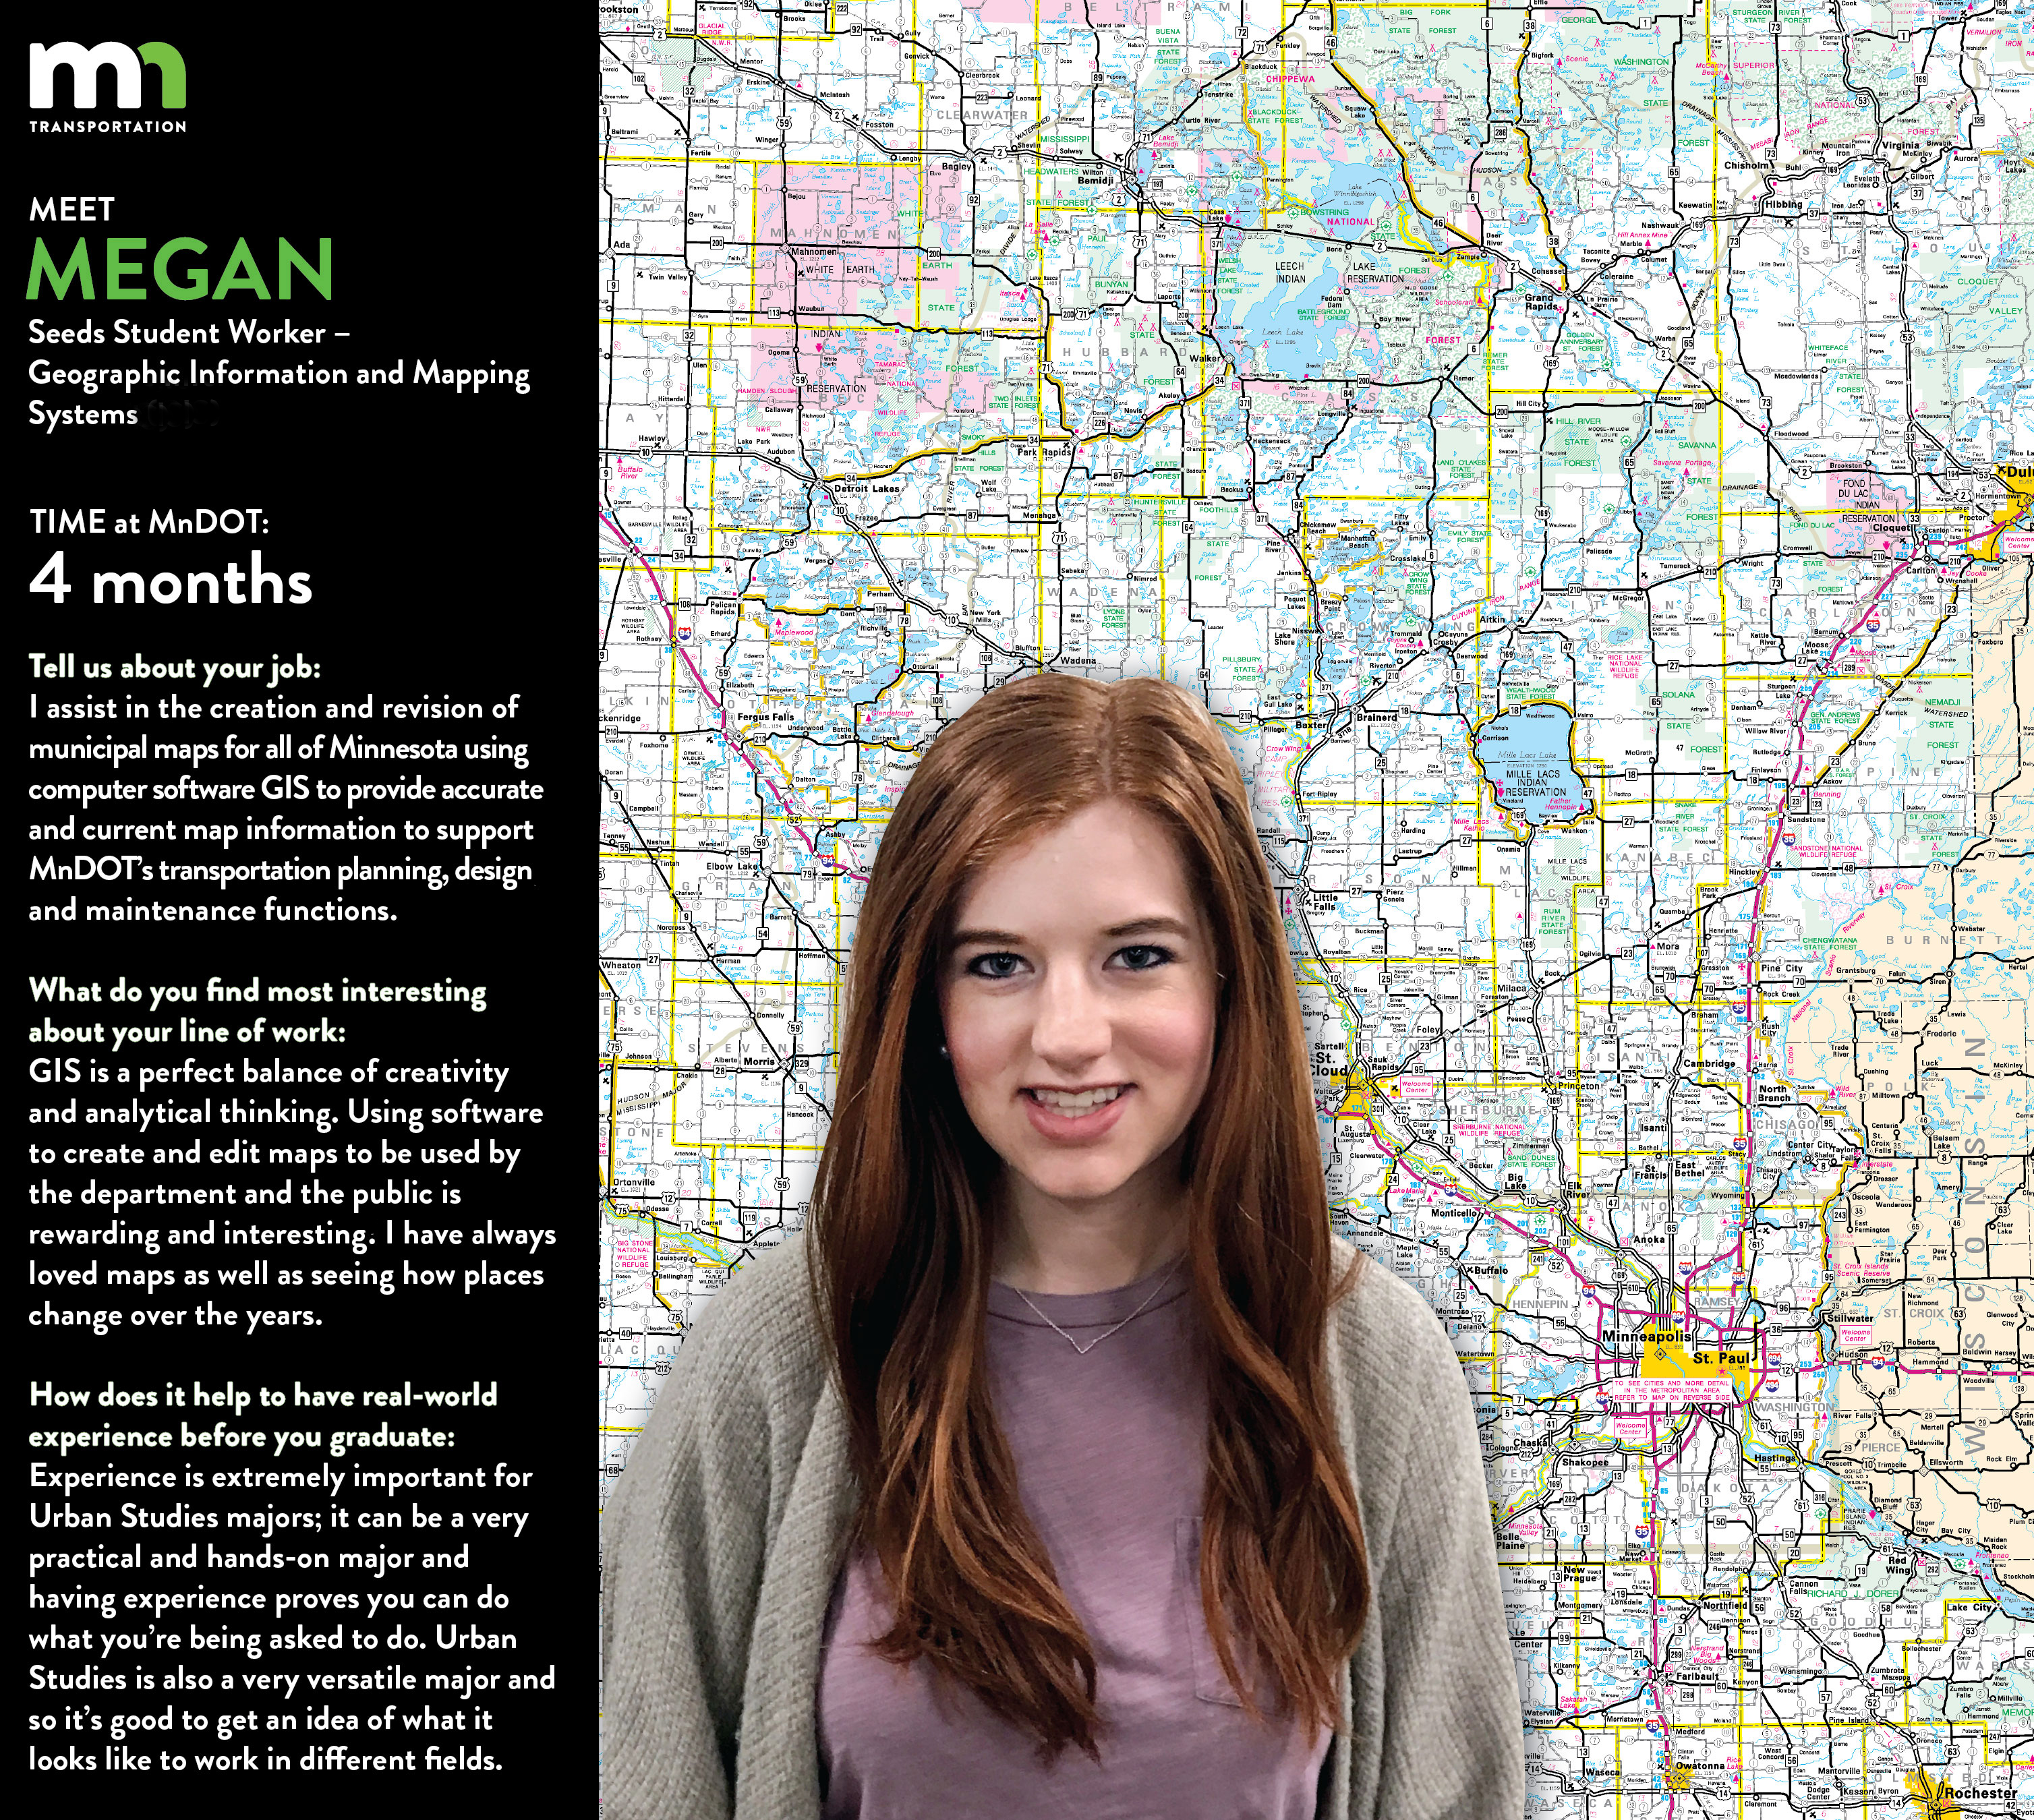 Megan Muckenhirn says I am currently working with the Geographic Information & mapping/cartography Unit in the office of Transportation System Management. I assist in the creation and revision of municipal maps for all of Minnesota using computer software GIS to provide accurate and current map information to support MnDOTs transportation planning, design, and maintenance functions. Much of my job consists of researching and editing features on city maps. GIS is a perfect balance of creativity and analytical thinking. Using this software to create and edit maps to be used by the department and the public is rewarding and interesting! I have always loved maps as well as seeing how places change over the years. In our department, we have maps and data from each city in Minnesota dating back close to 100 years ago. Observing cities then and now and becoming familiar with the roadways and systems that make transportation possible is a lot of fun. I hope to work for a few years gaining skills and experience and then go back to the University of Minnesota to complete my masters. My goal is to work as a city planner in sustainable urban development helping promote green space, mixed-use development and sustainable and livable communities that protect historic, cultural, and environmental resources. Experience is extremely important for Urban Studies majors! It can be a very practical and hands-on major and having experience proves you can do what youre being asked to do. But not only does it help with getting jobs out of college, it is also beneficial to help get a sense of what kind of jobs are out there and what I like doing. Urban Studies is a very versatile major and so its good to get an idea of what it looks like to work in different fields. 